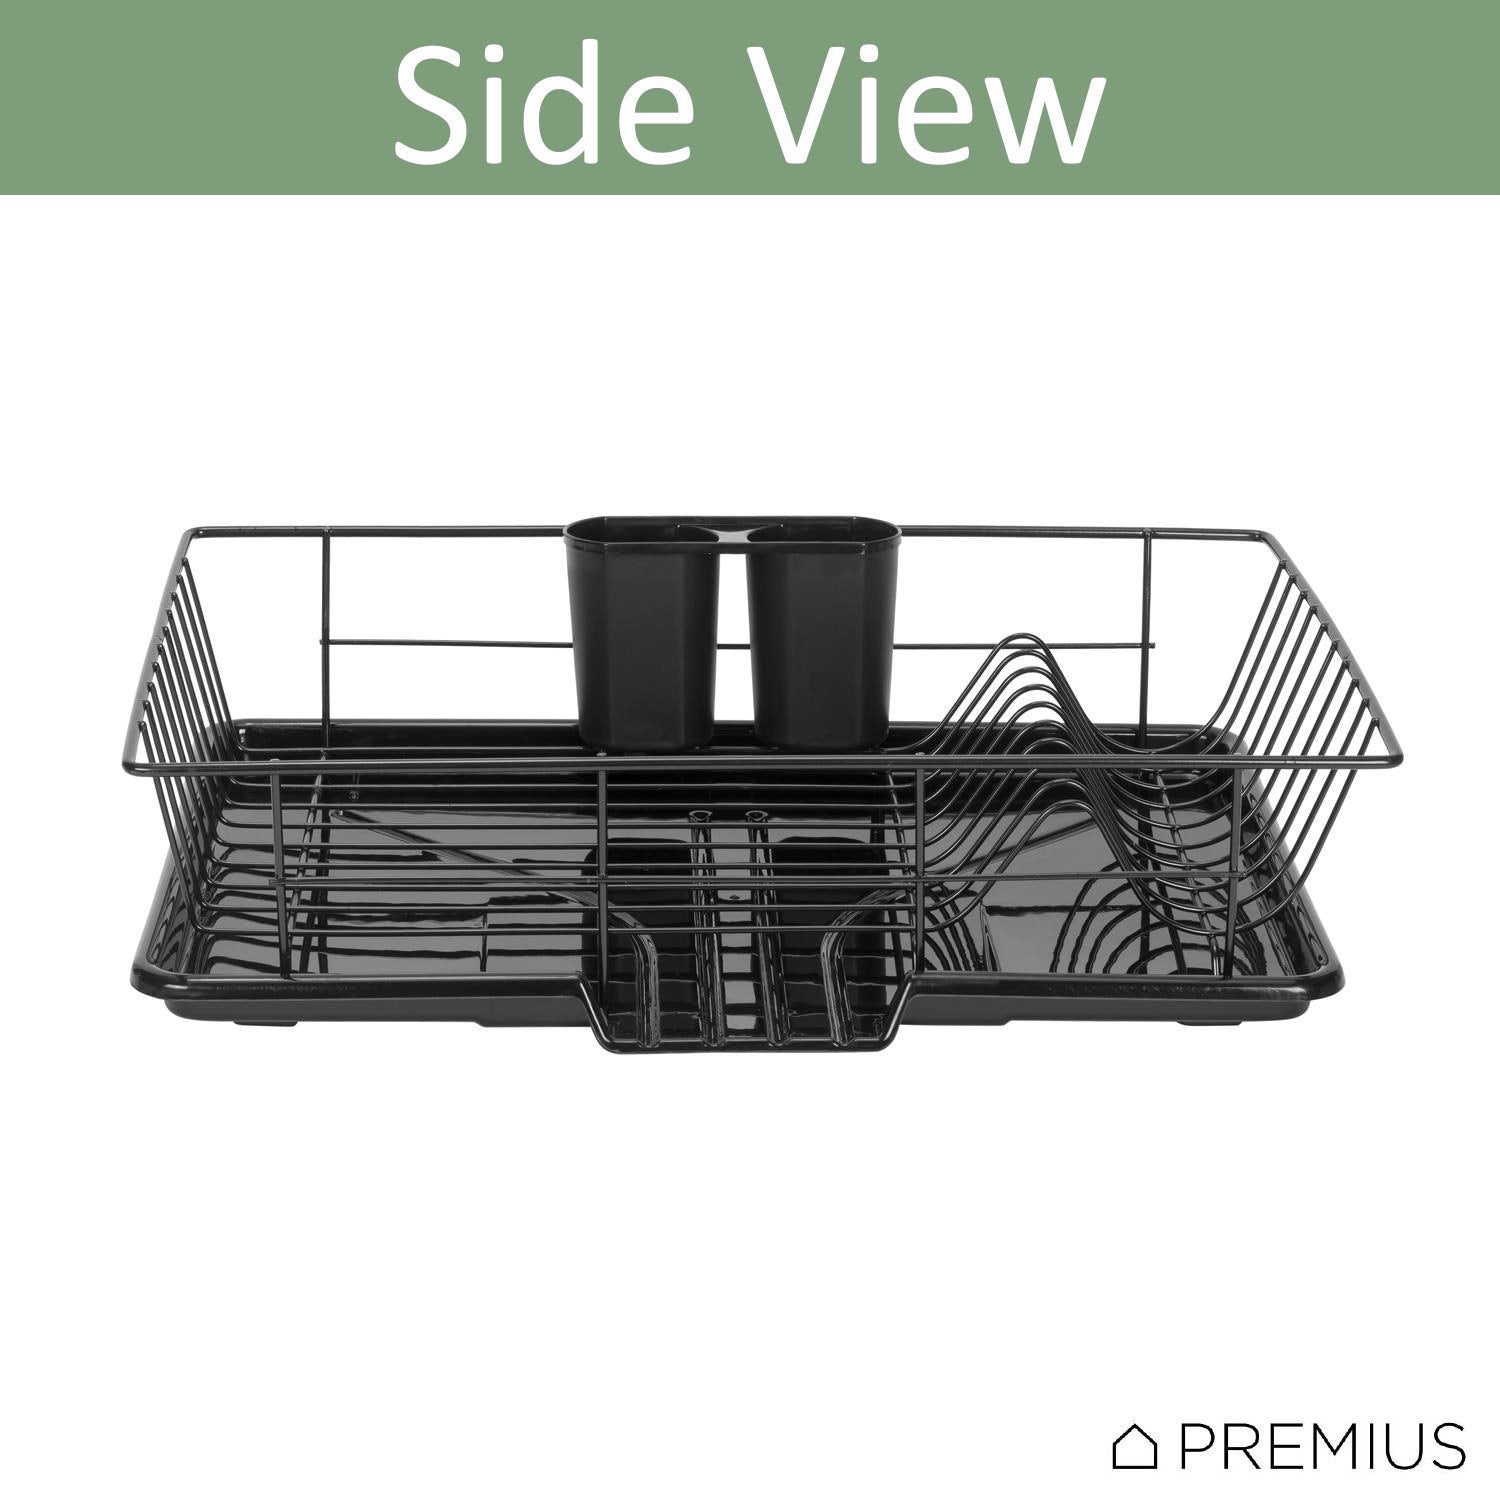 Premius 3-Piece Dish Drainer With Cutlery Holder, Black, 19x12x5 Inches